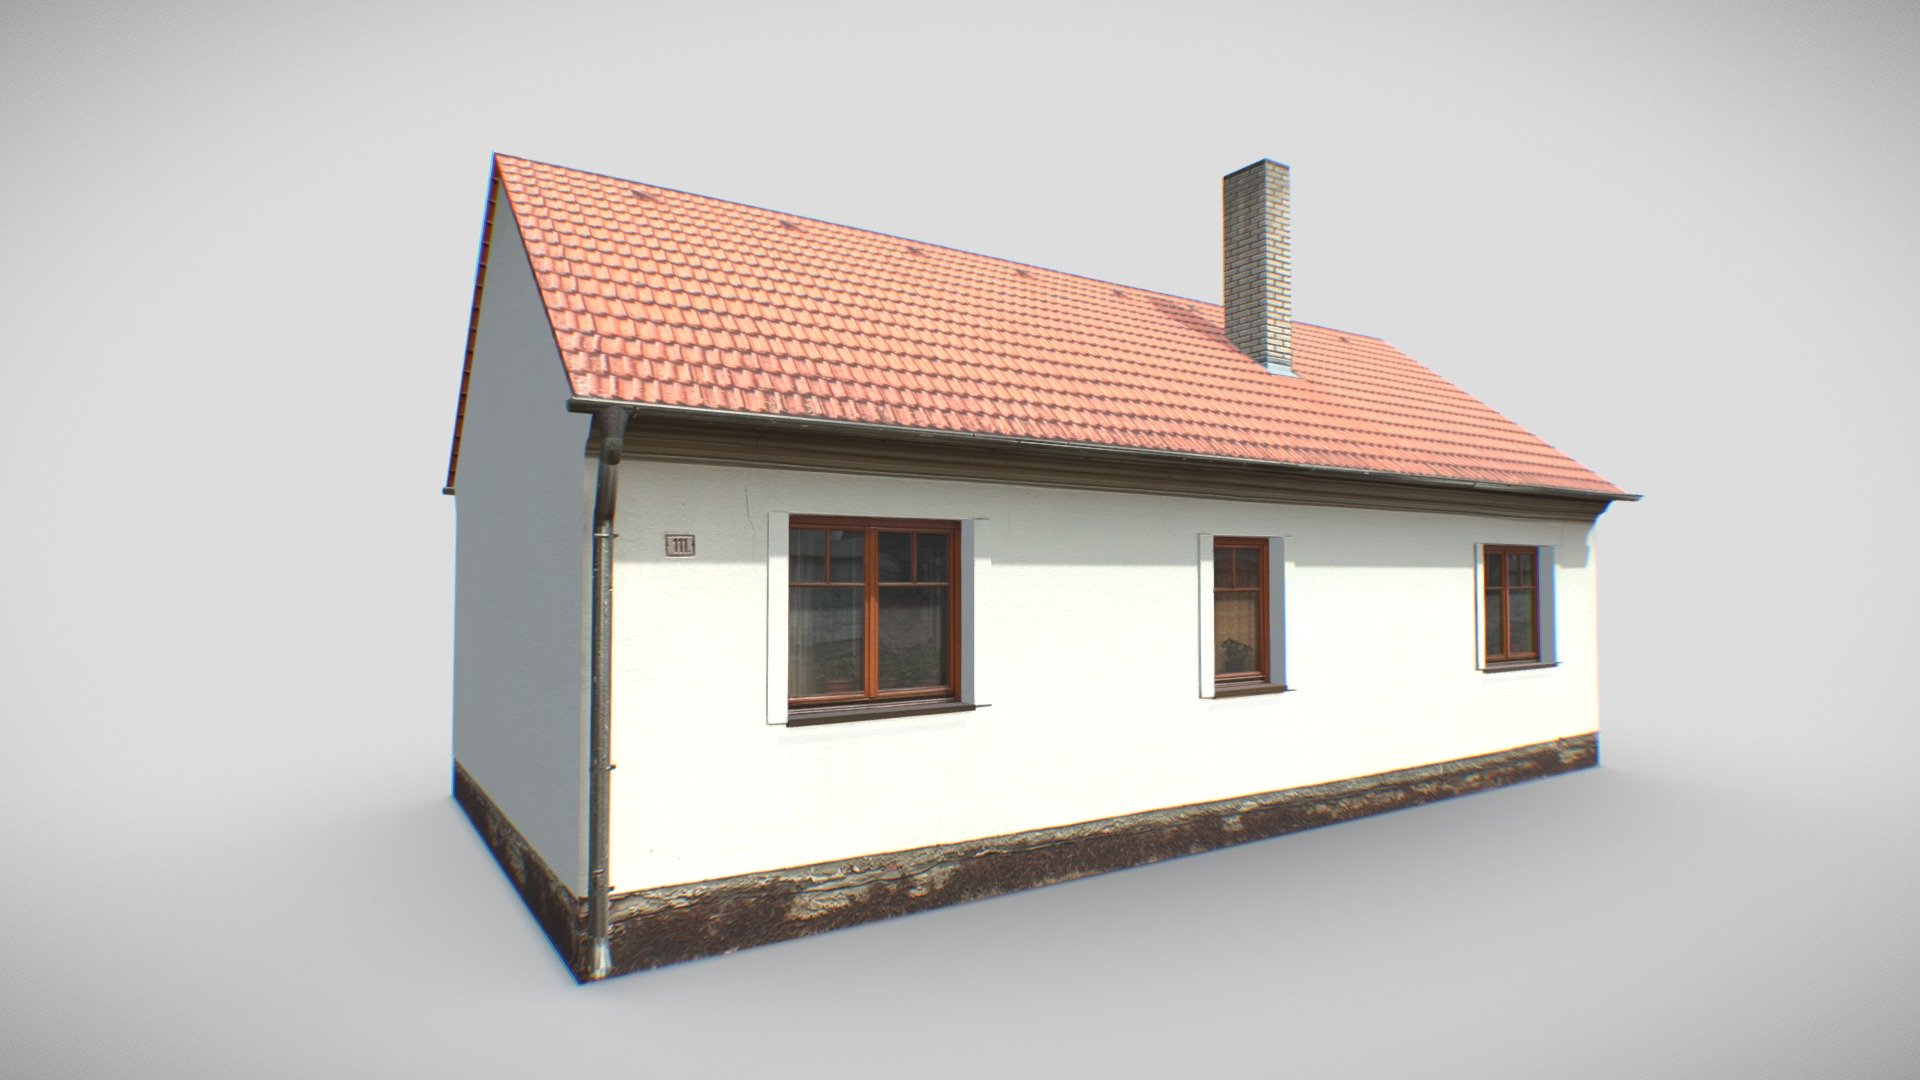 Its a village family house from europe. Exterior only. Simple geometry. Textures made from actual photos 3d model